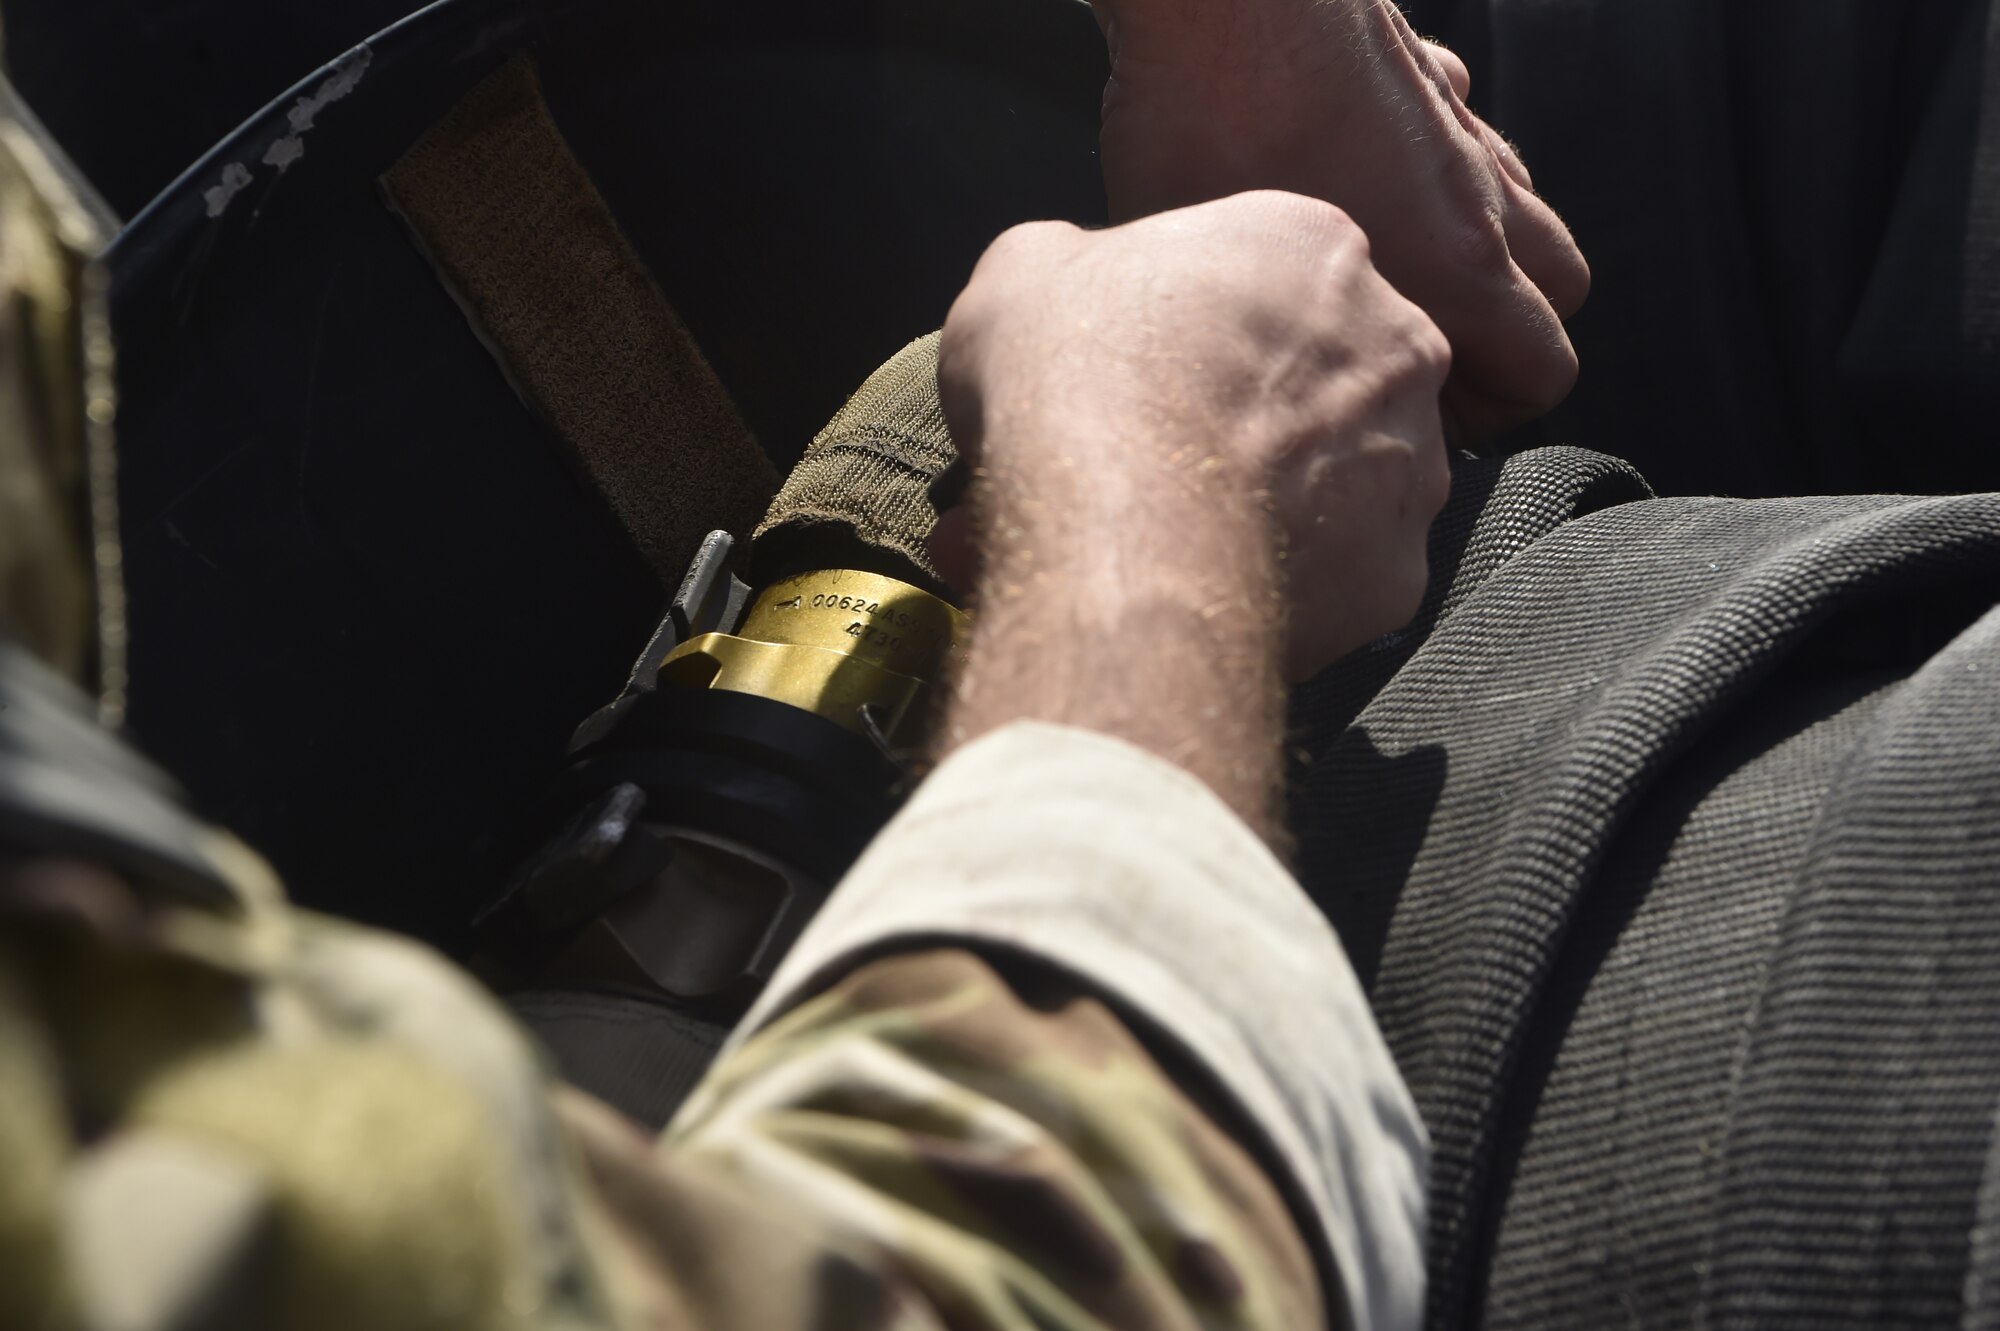 Tech. Sgt. Nicholas T. Piper, 628th Logistics Readiness Squadron Forward Area Refueling Point team chief, straps in a fuel hose prior to the start of a FARP team tryout here Feb. 15, 2018.